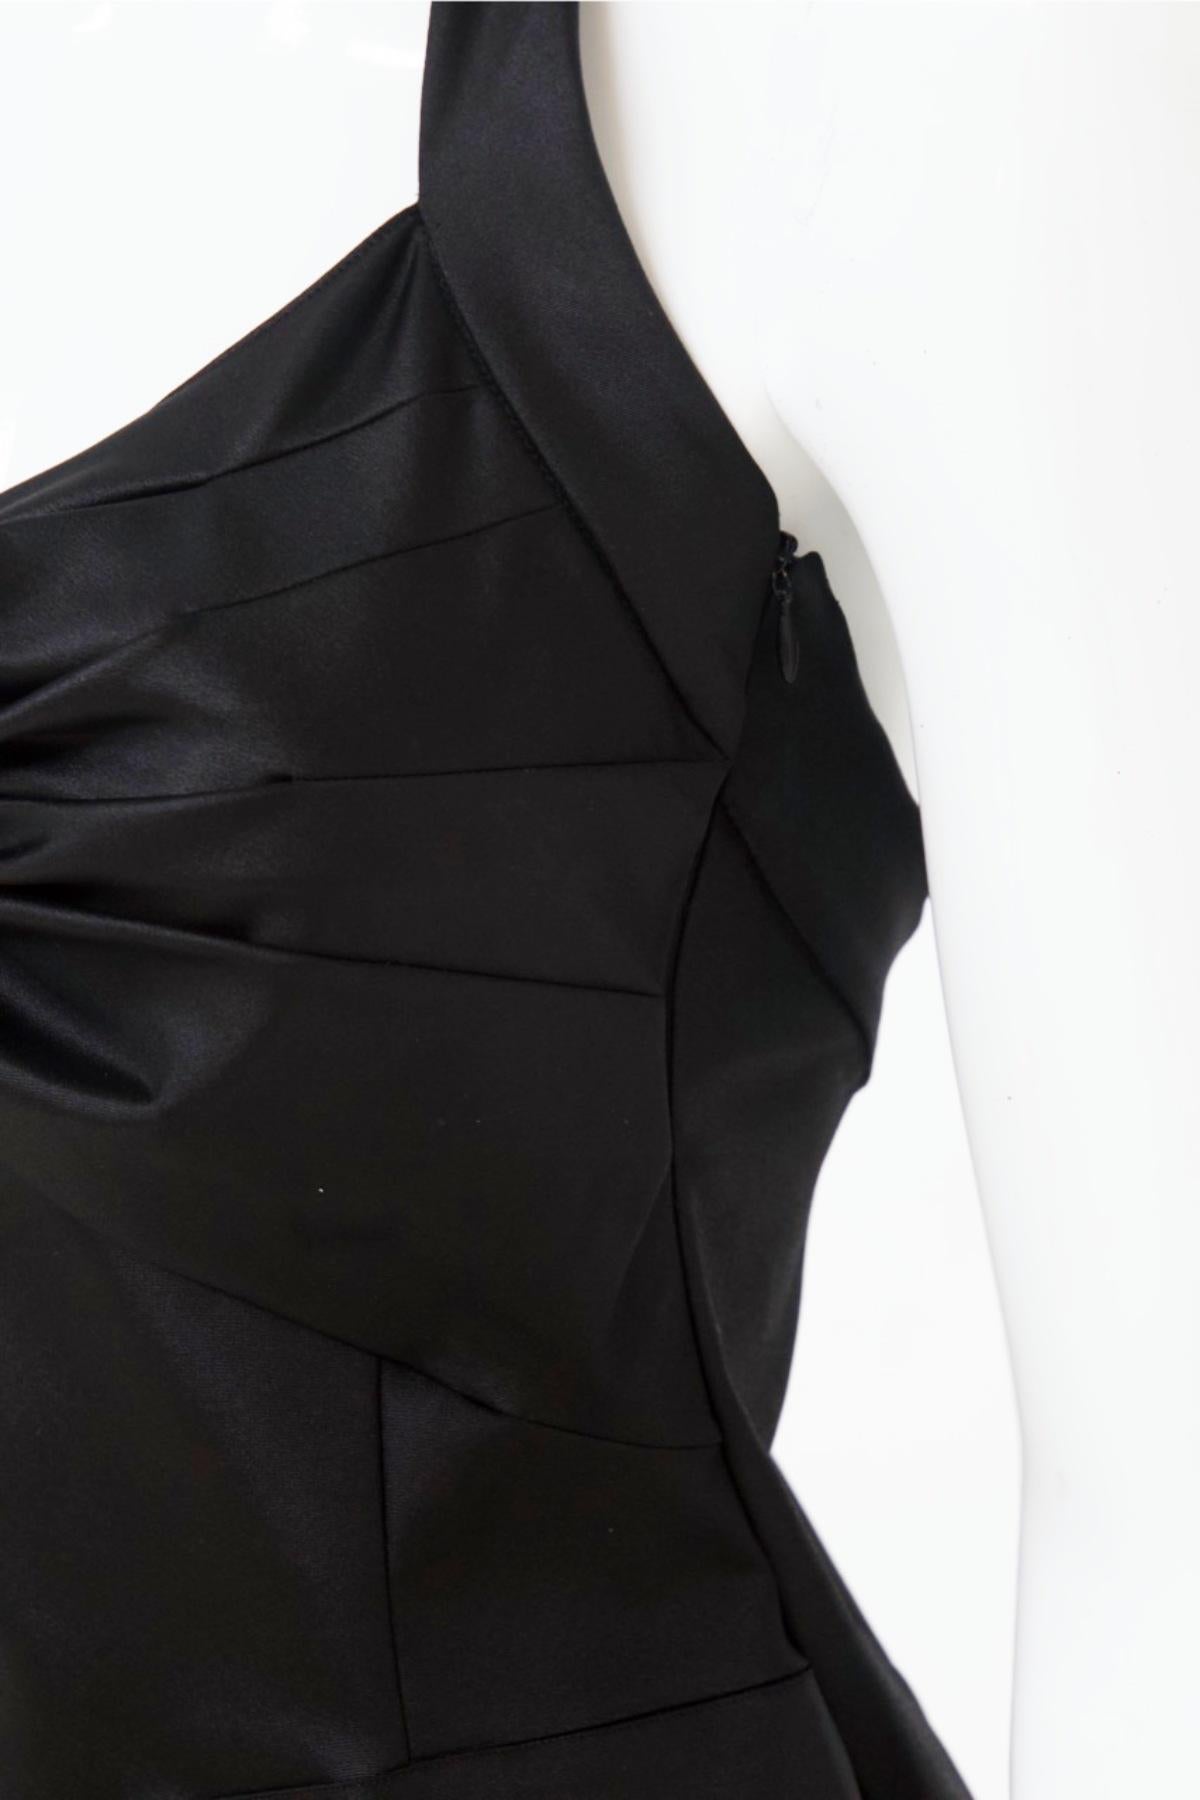 Christian Dior by John Galliano Black Satin Silk Lined Knot Dress In Good Condition For Sale In Milano, IT